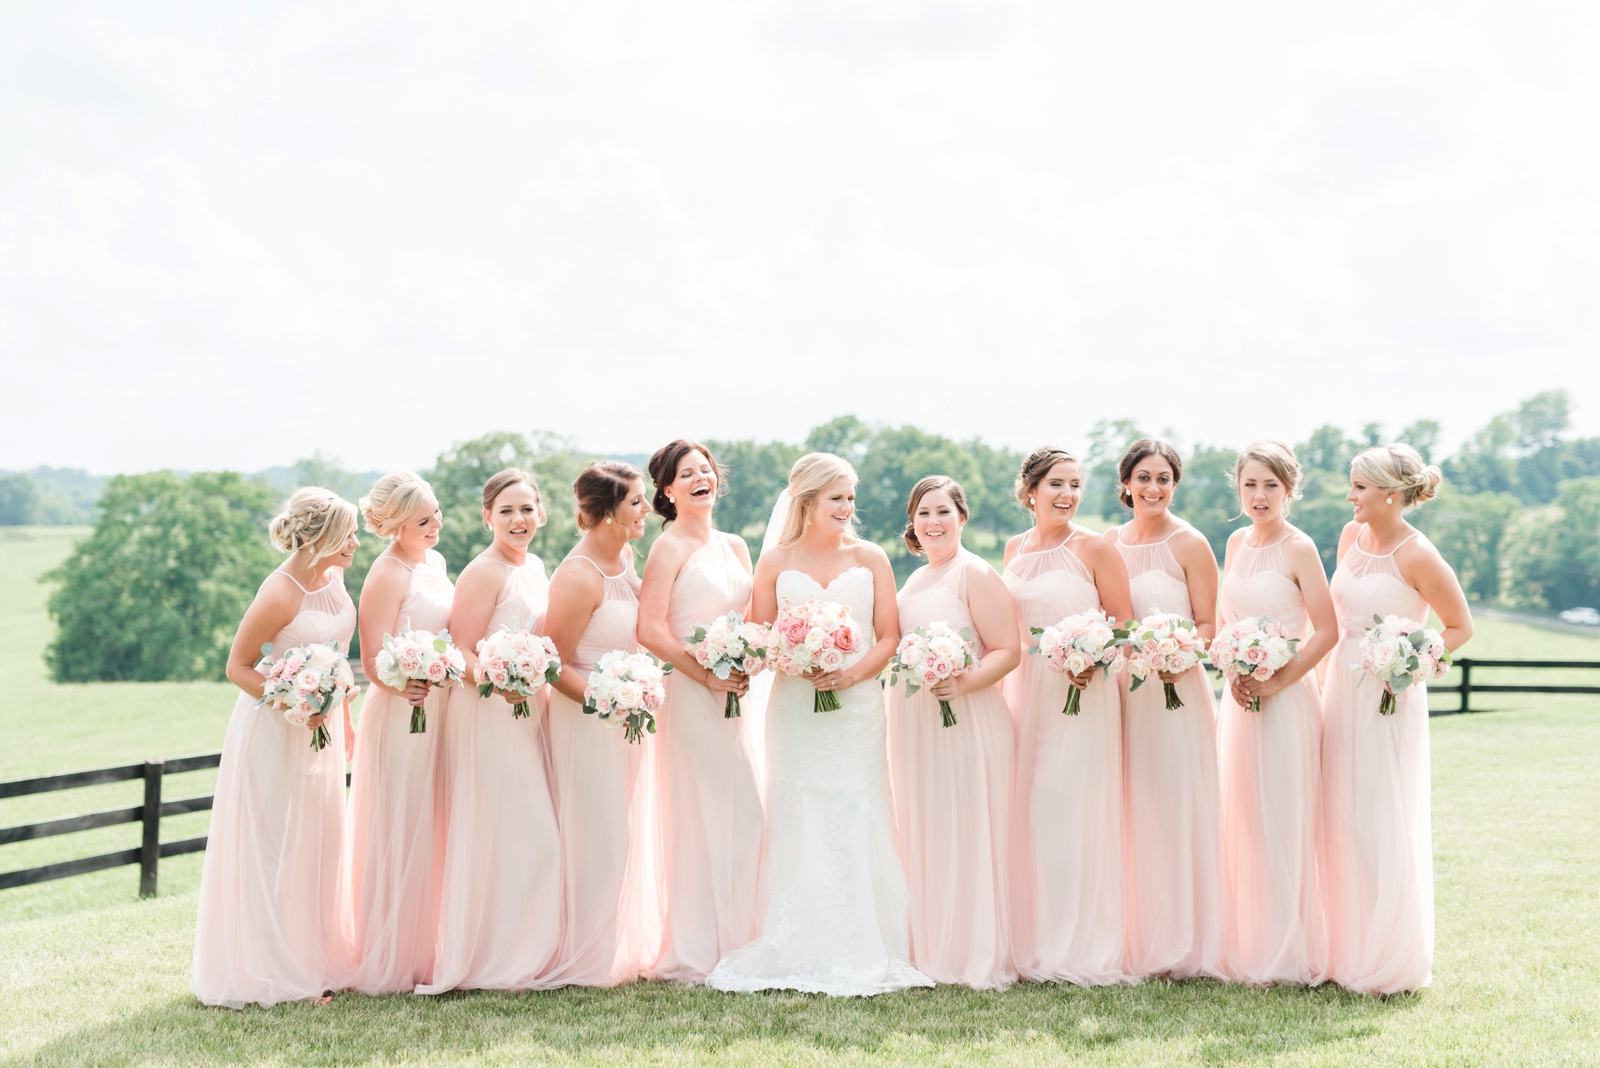 3 tips for shooting in midday sun by virginia wedding photographer